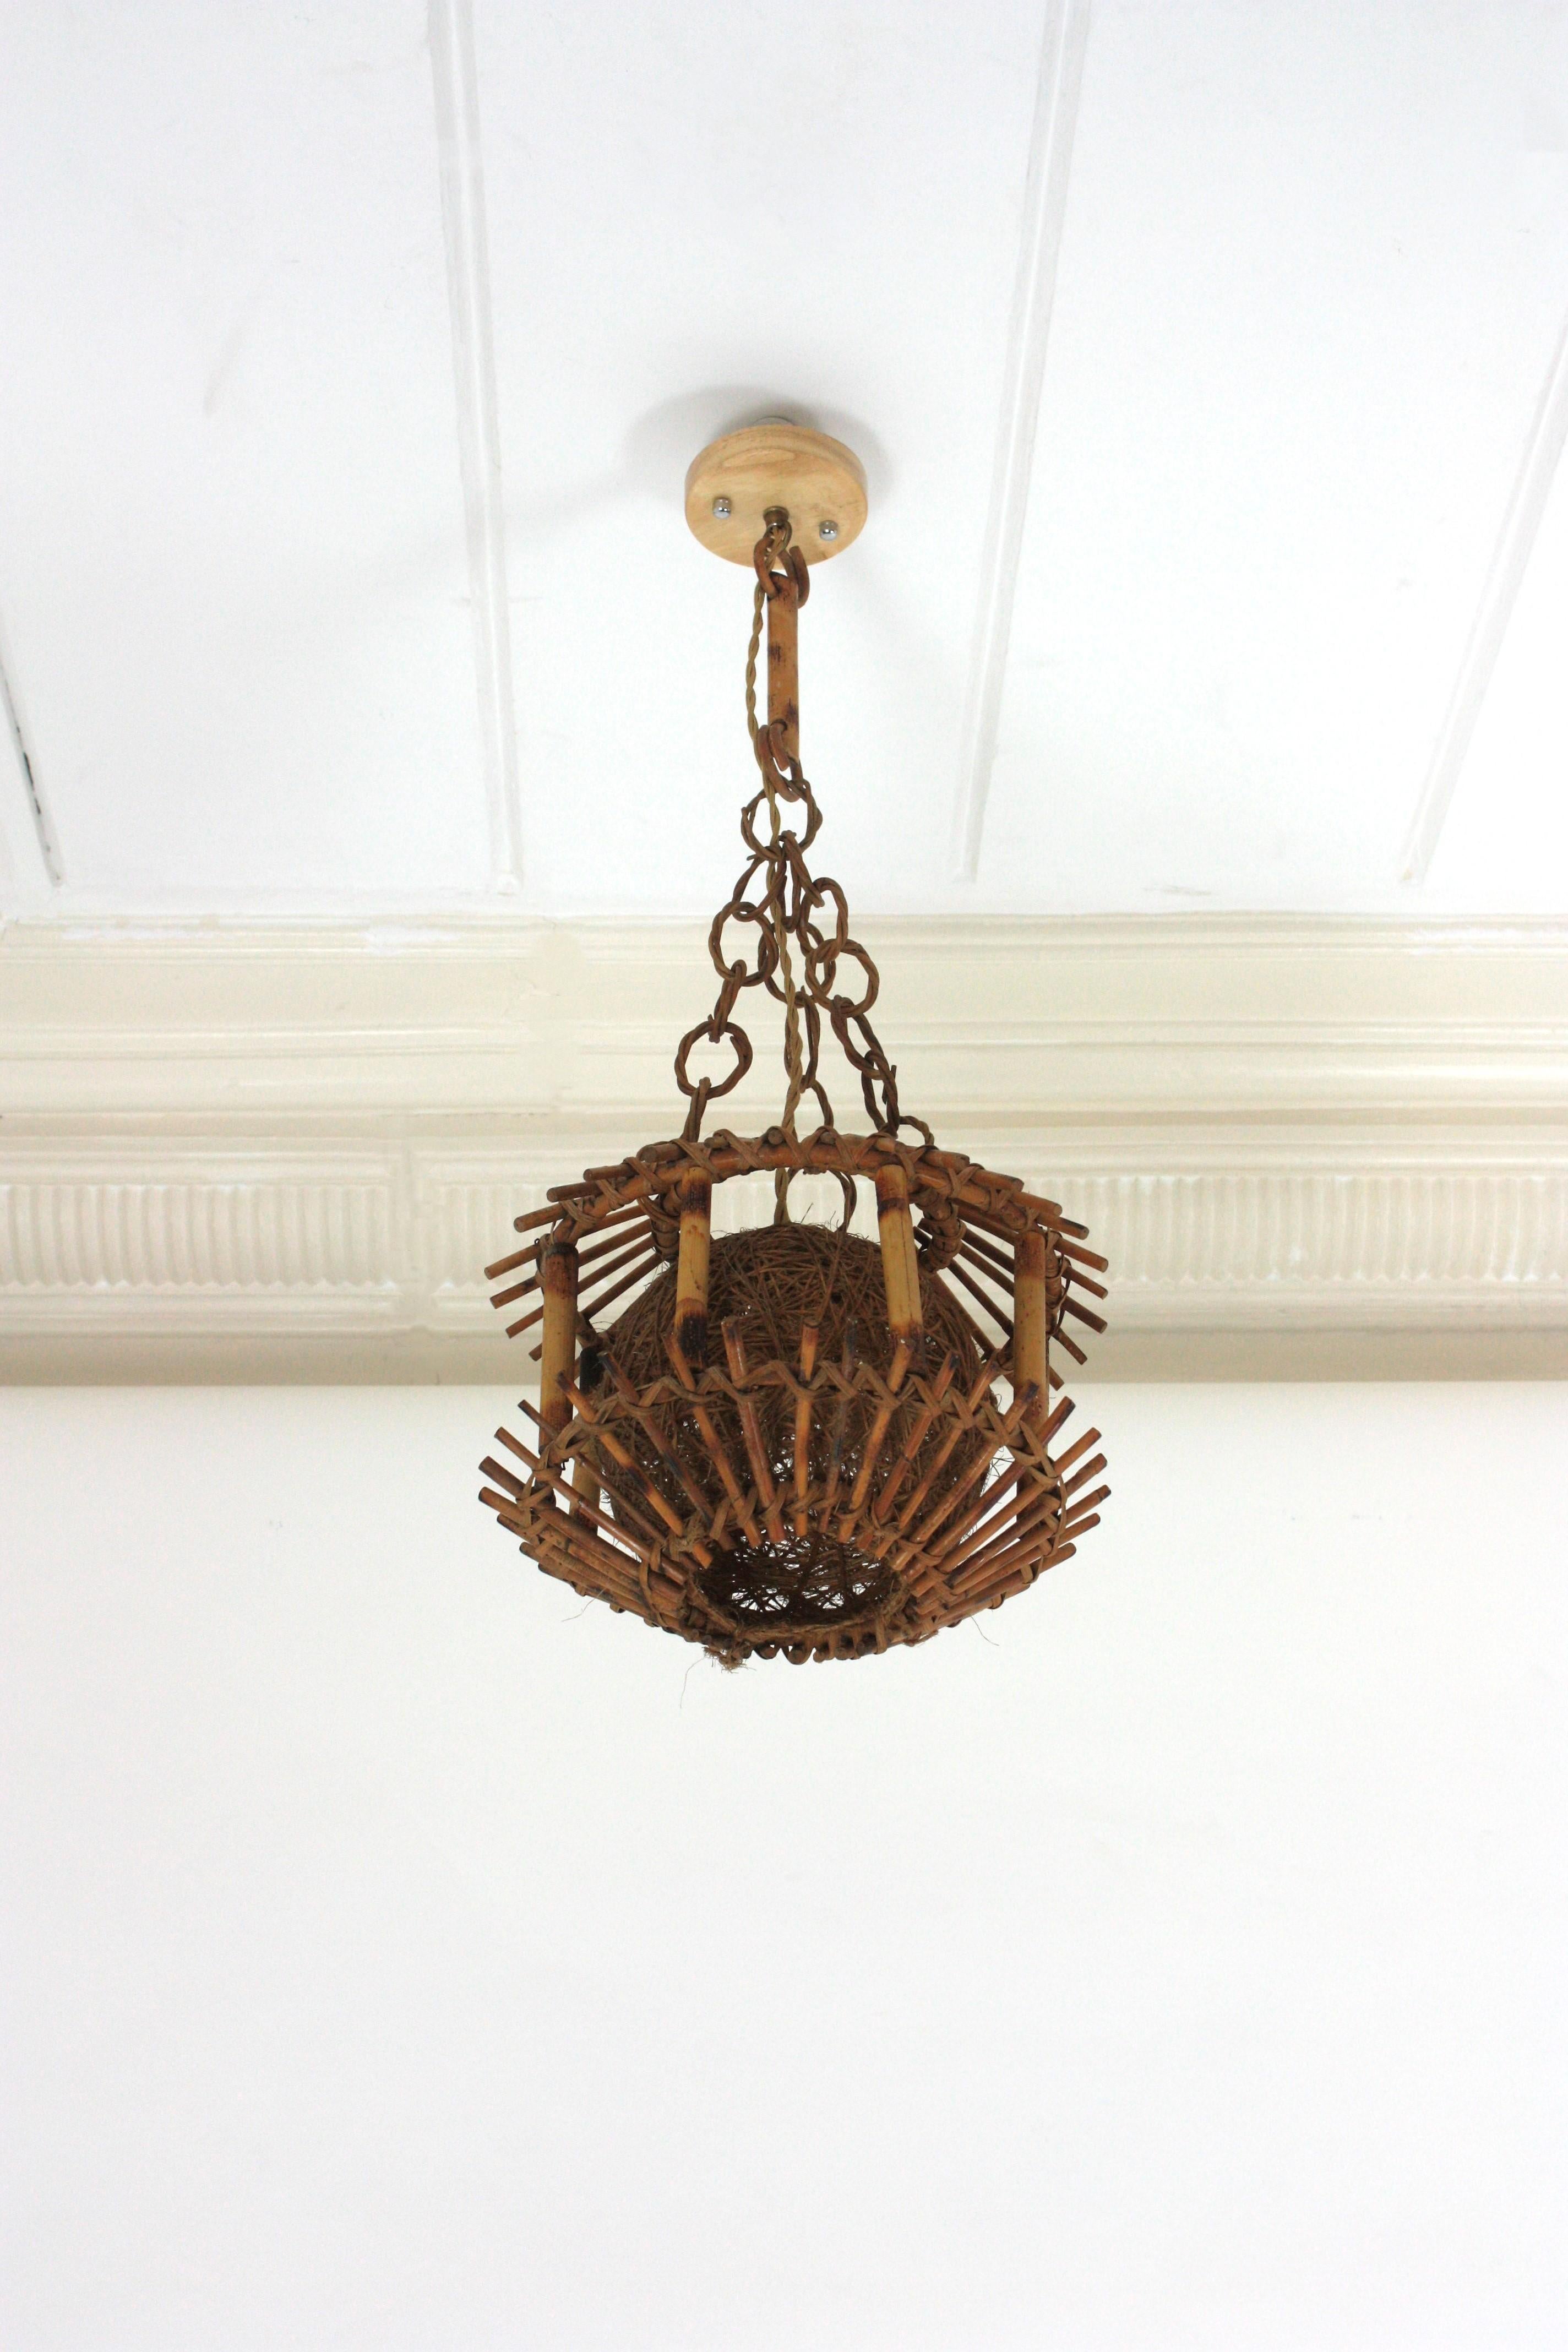 Rattan Bamboo Pendant Hanging Light or Lantern with Chinoiserie Accents, 1950s For Sale 3